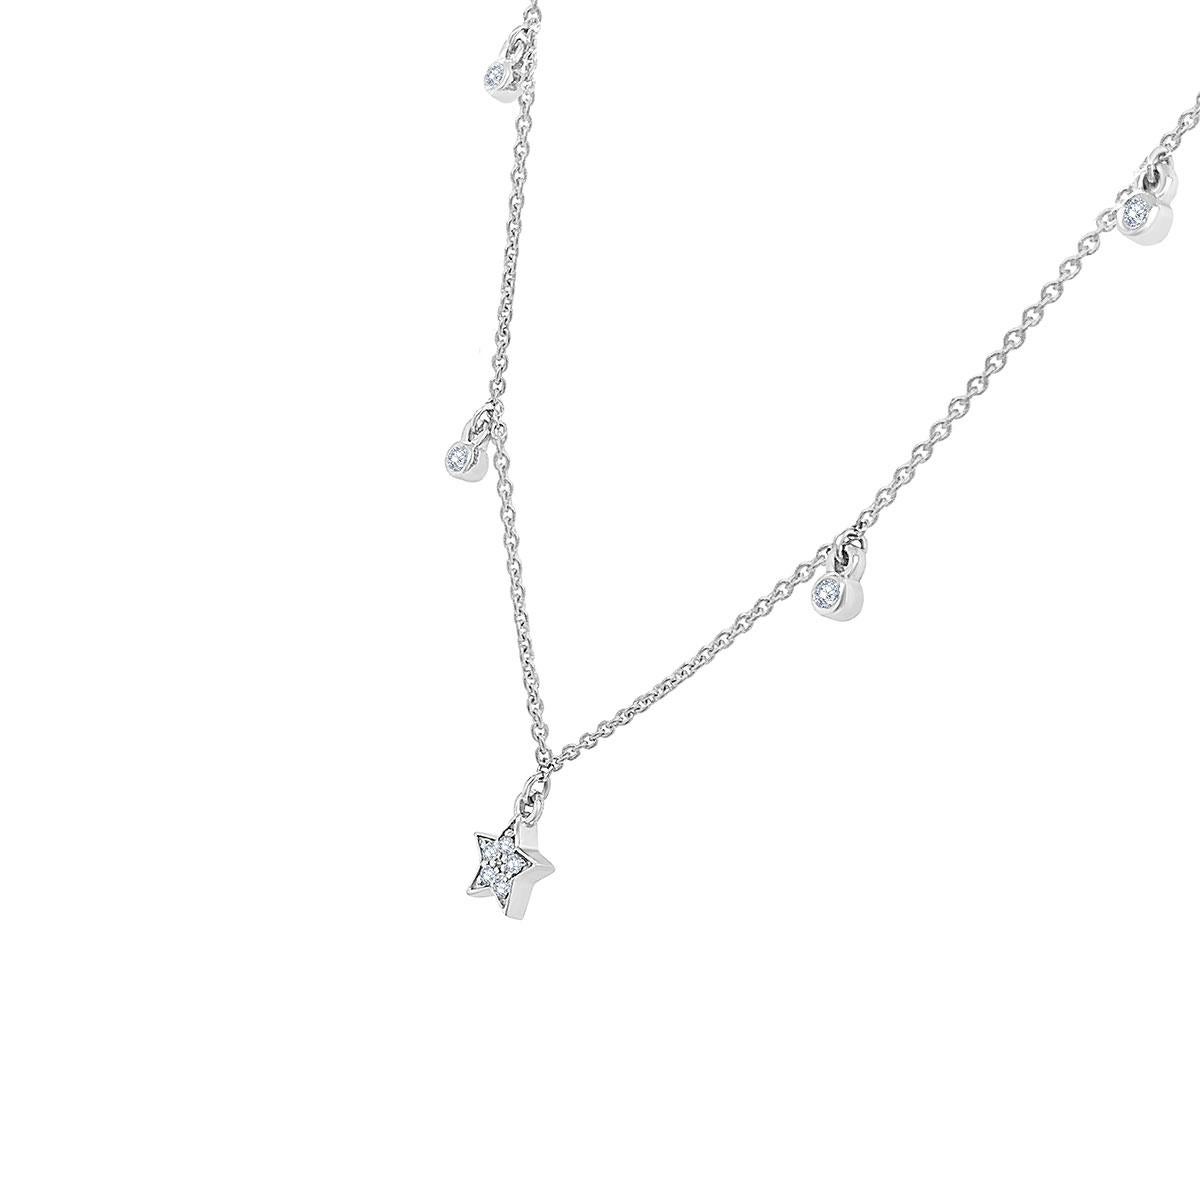 This delicate necklace features three (3) Star-shaped diamond pendants evenly stationed between six(6) brilliant diamonds bezel set. Experience the difference in person!

Product details: 

Center Gemstone Type: NATURAL DIAMOND
Center Gemstone